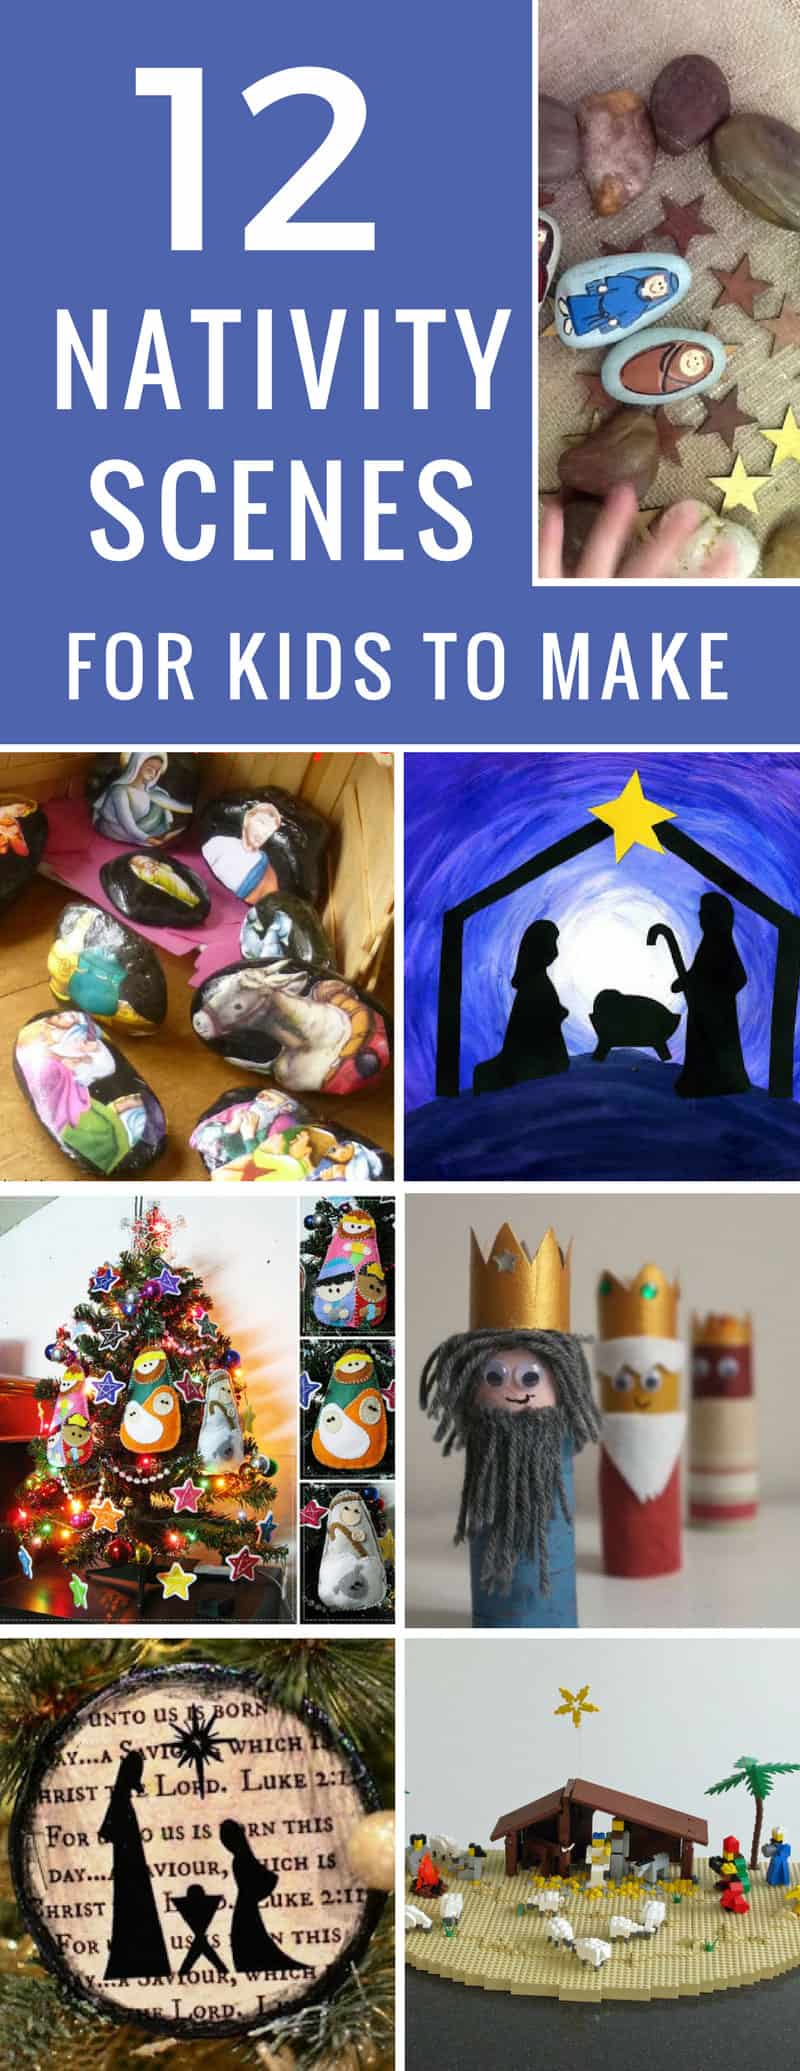 All the kids are going to love making these nativity crafts and they're so lovely we'll be getting them out next Christmas too!